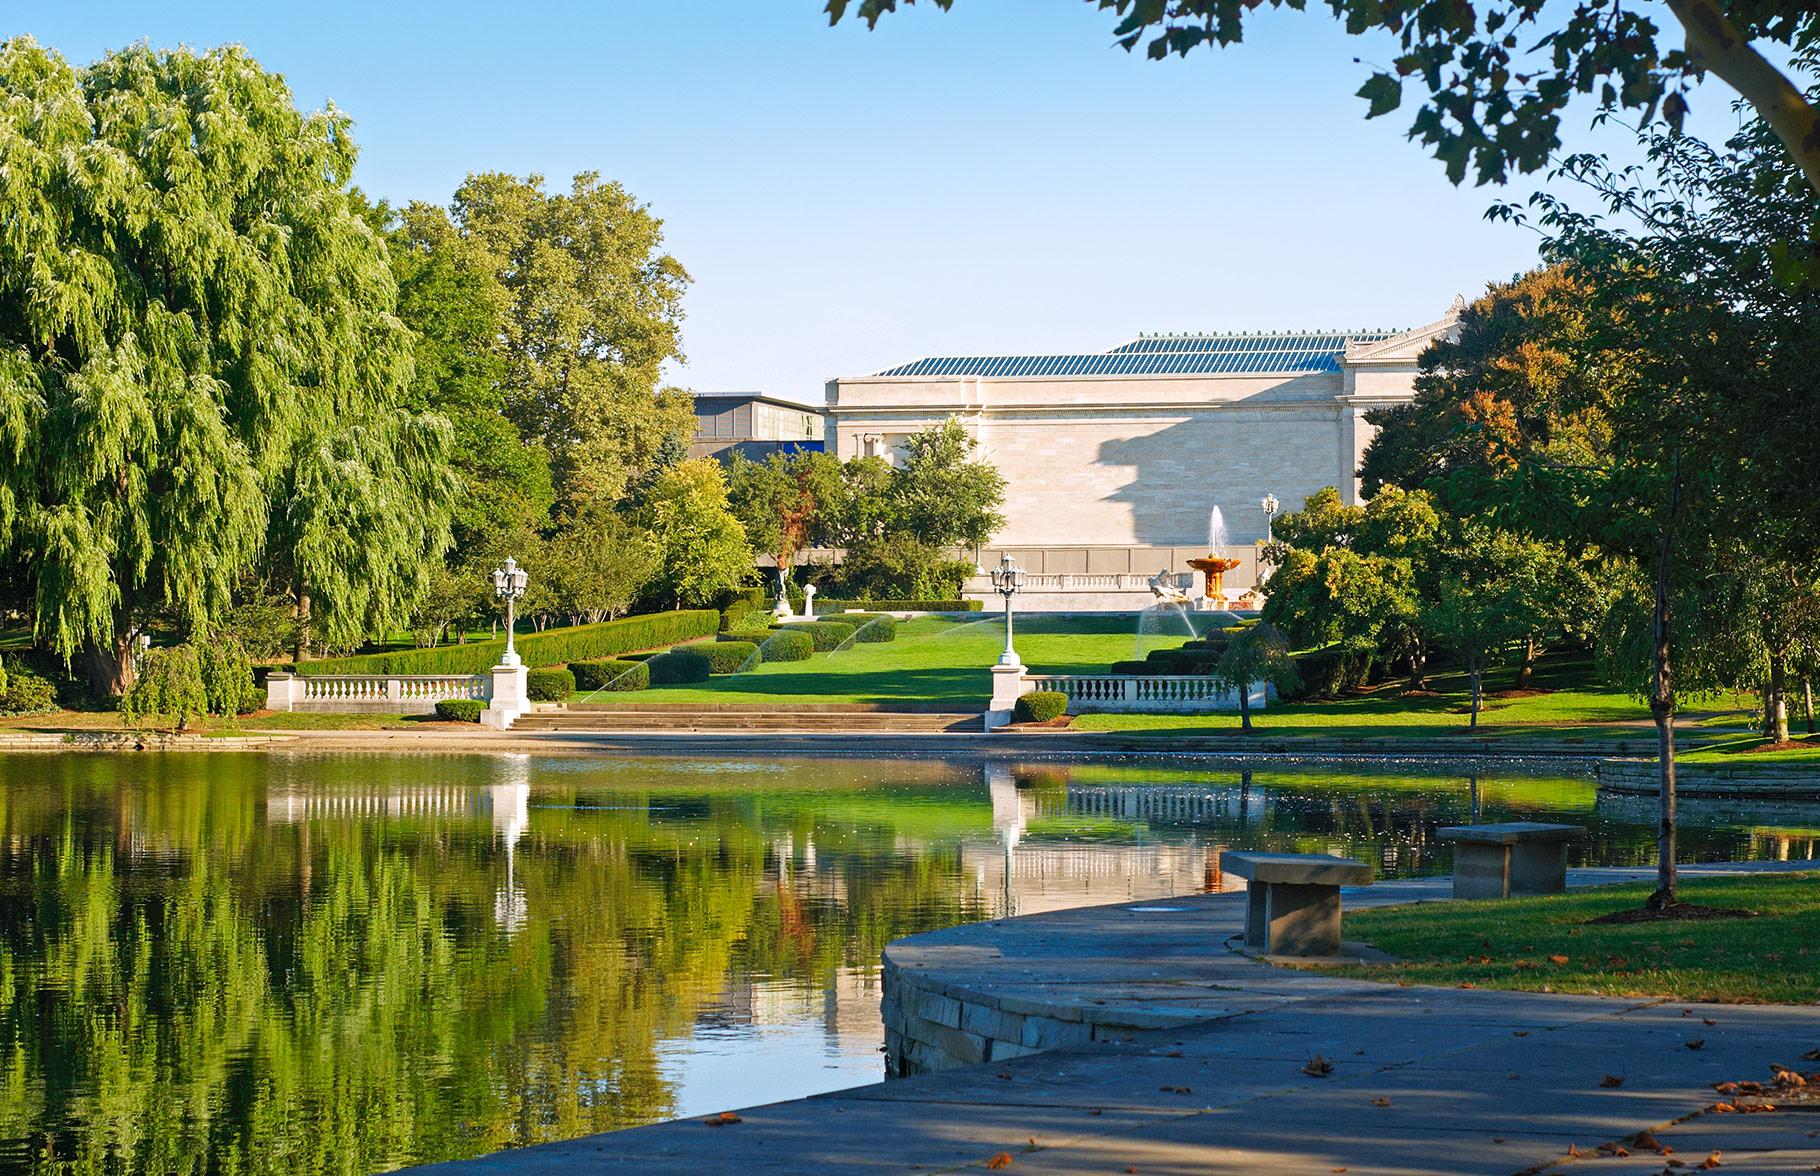 A view of the front of the Cleveland Museum of Art with the pond in front